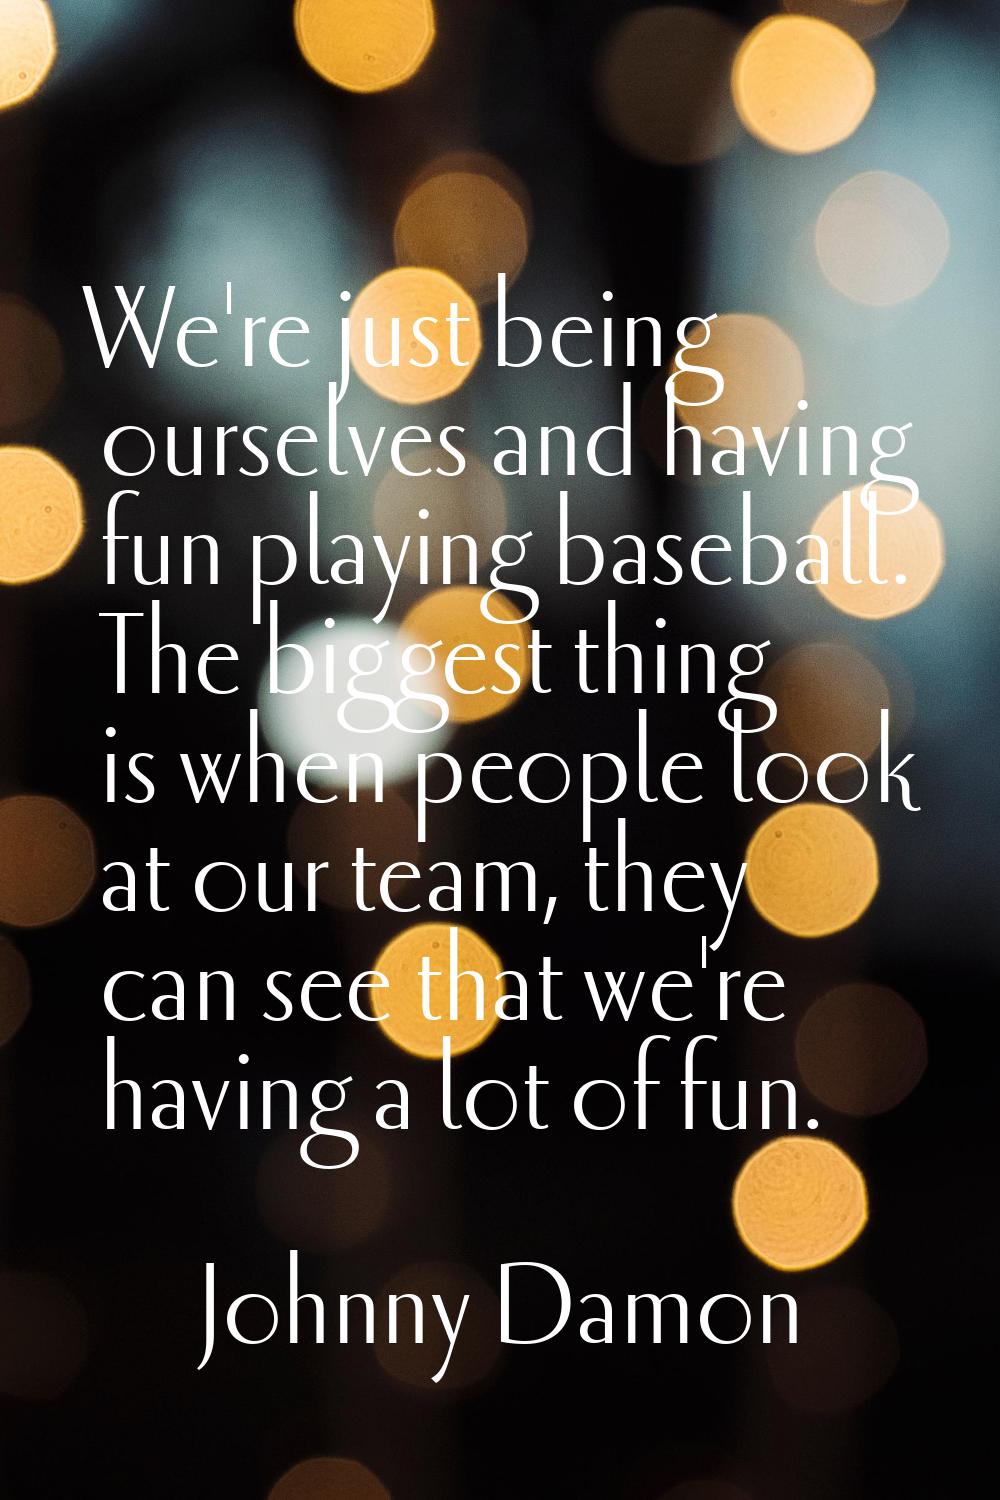 We're just being ourselves and having fun playing baseball. The biggest thing is when people look a